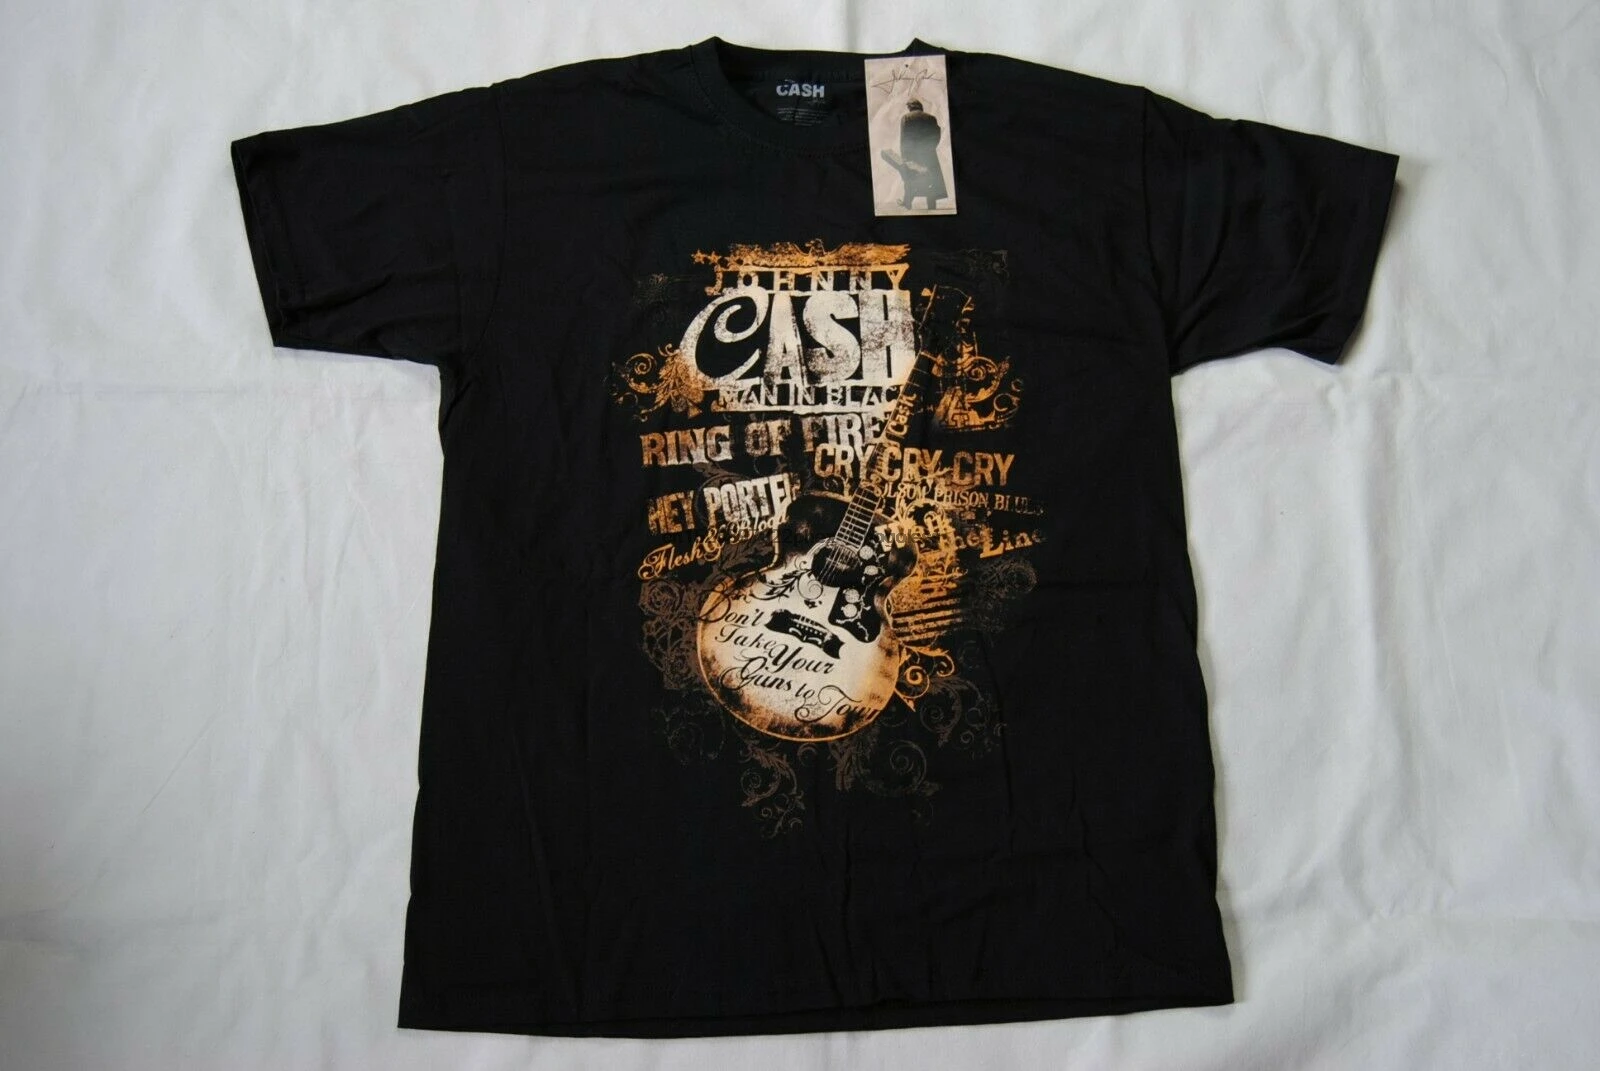 JOHNNY CASH GUITAR TEXT T SHIRT NEW OFFICIAL MAN IN BLACK RING OF FIRE CRY |